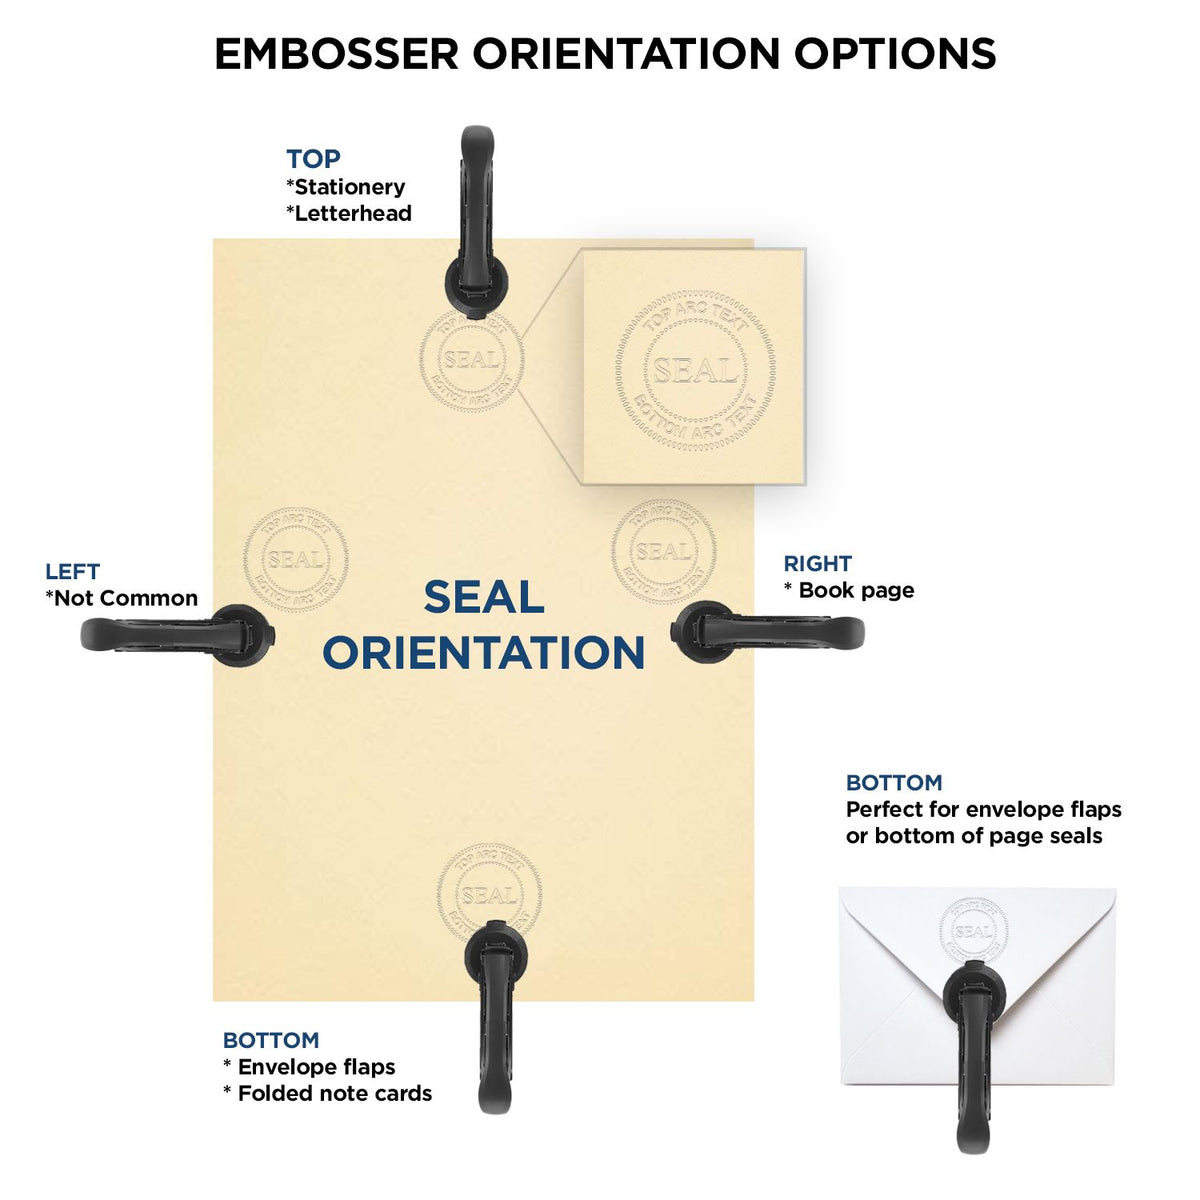 An infographic for the New Jersey Geologist Desk Seal showing embosser orientation, this is showing examples of a top, bottom, right and left insert.